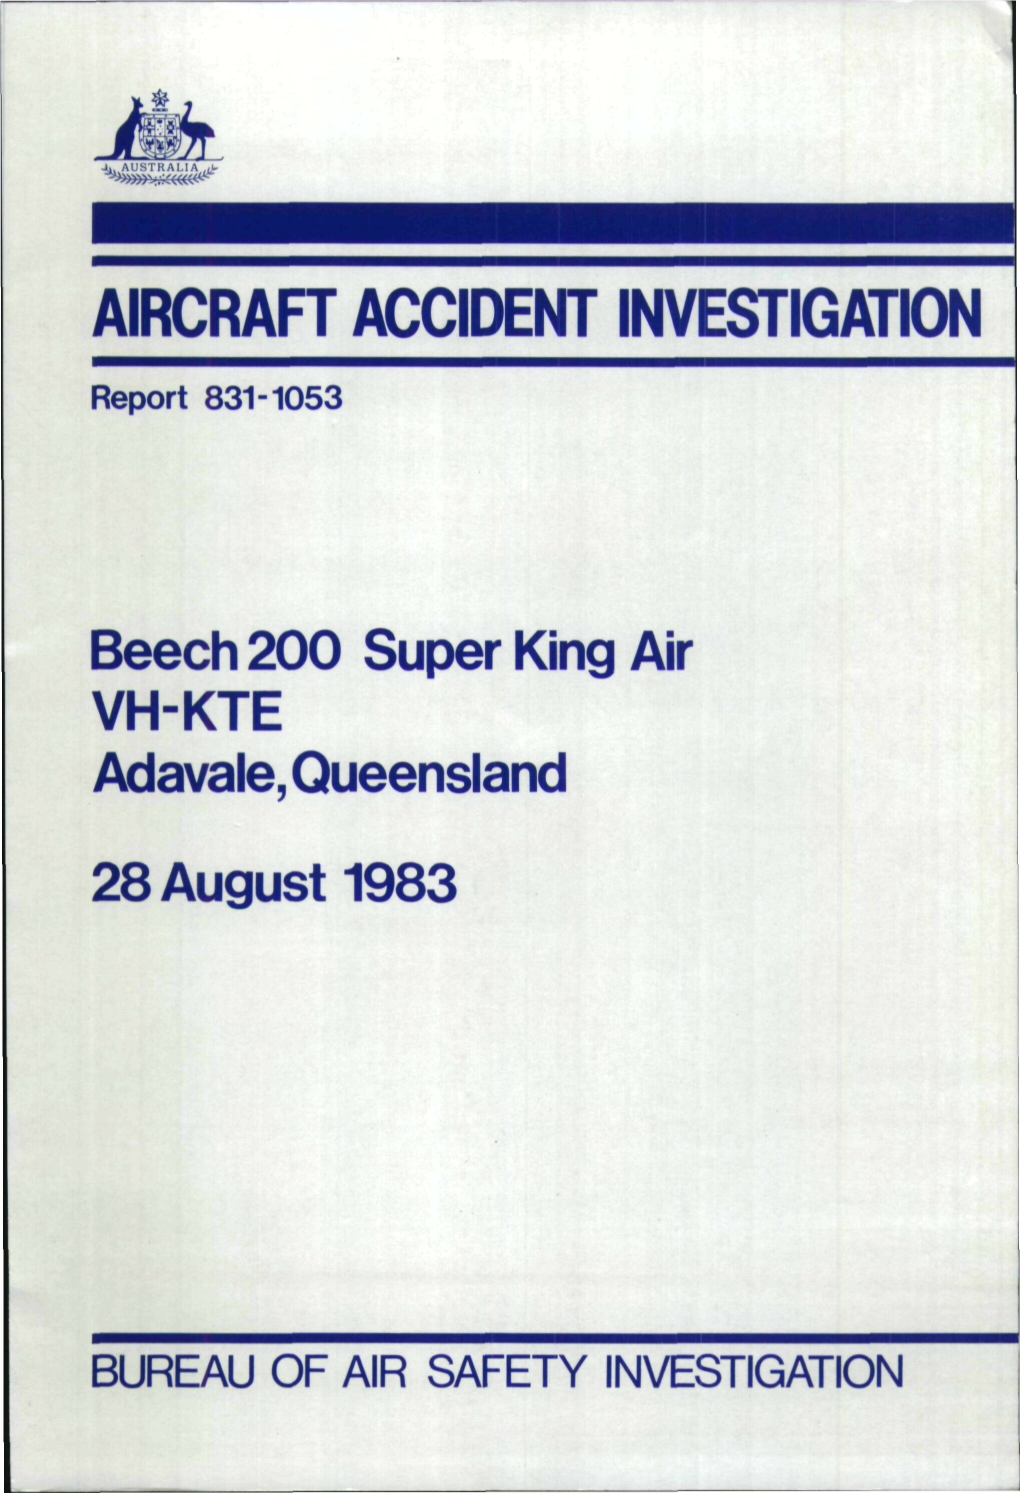 AIRCRAFT ACCIDENT INVESTIGATION Report 831-1053